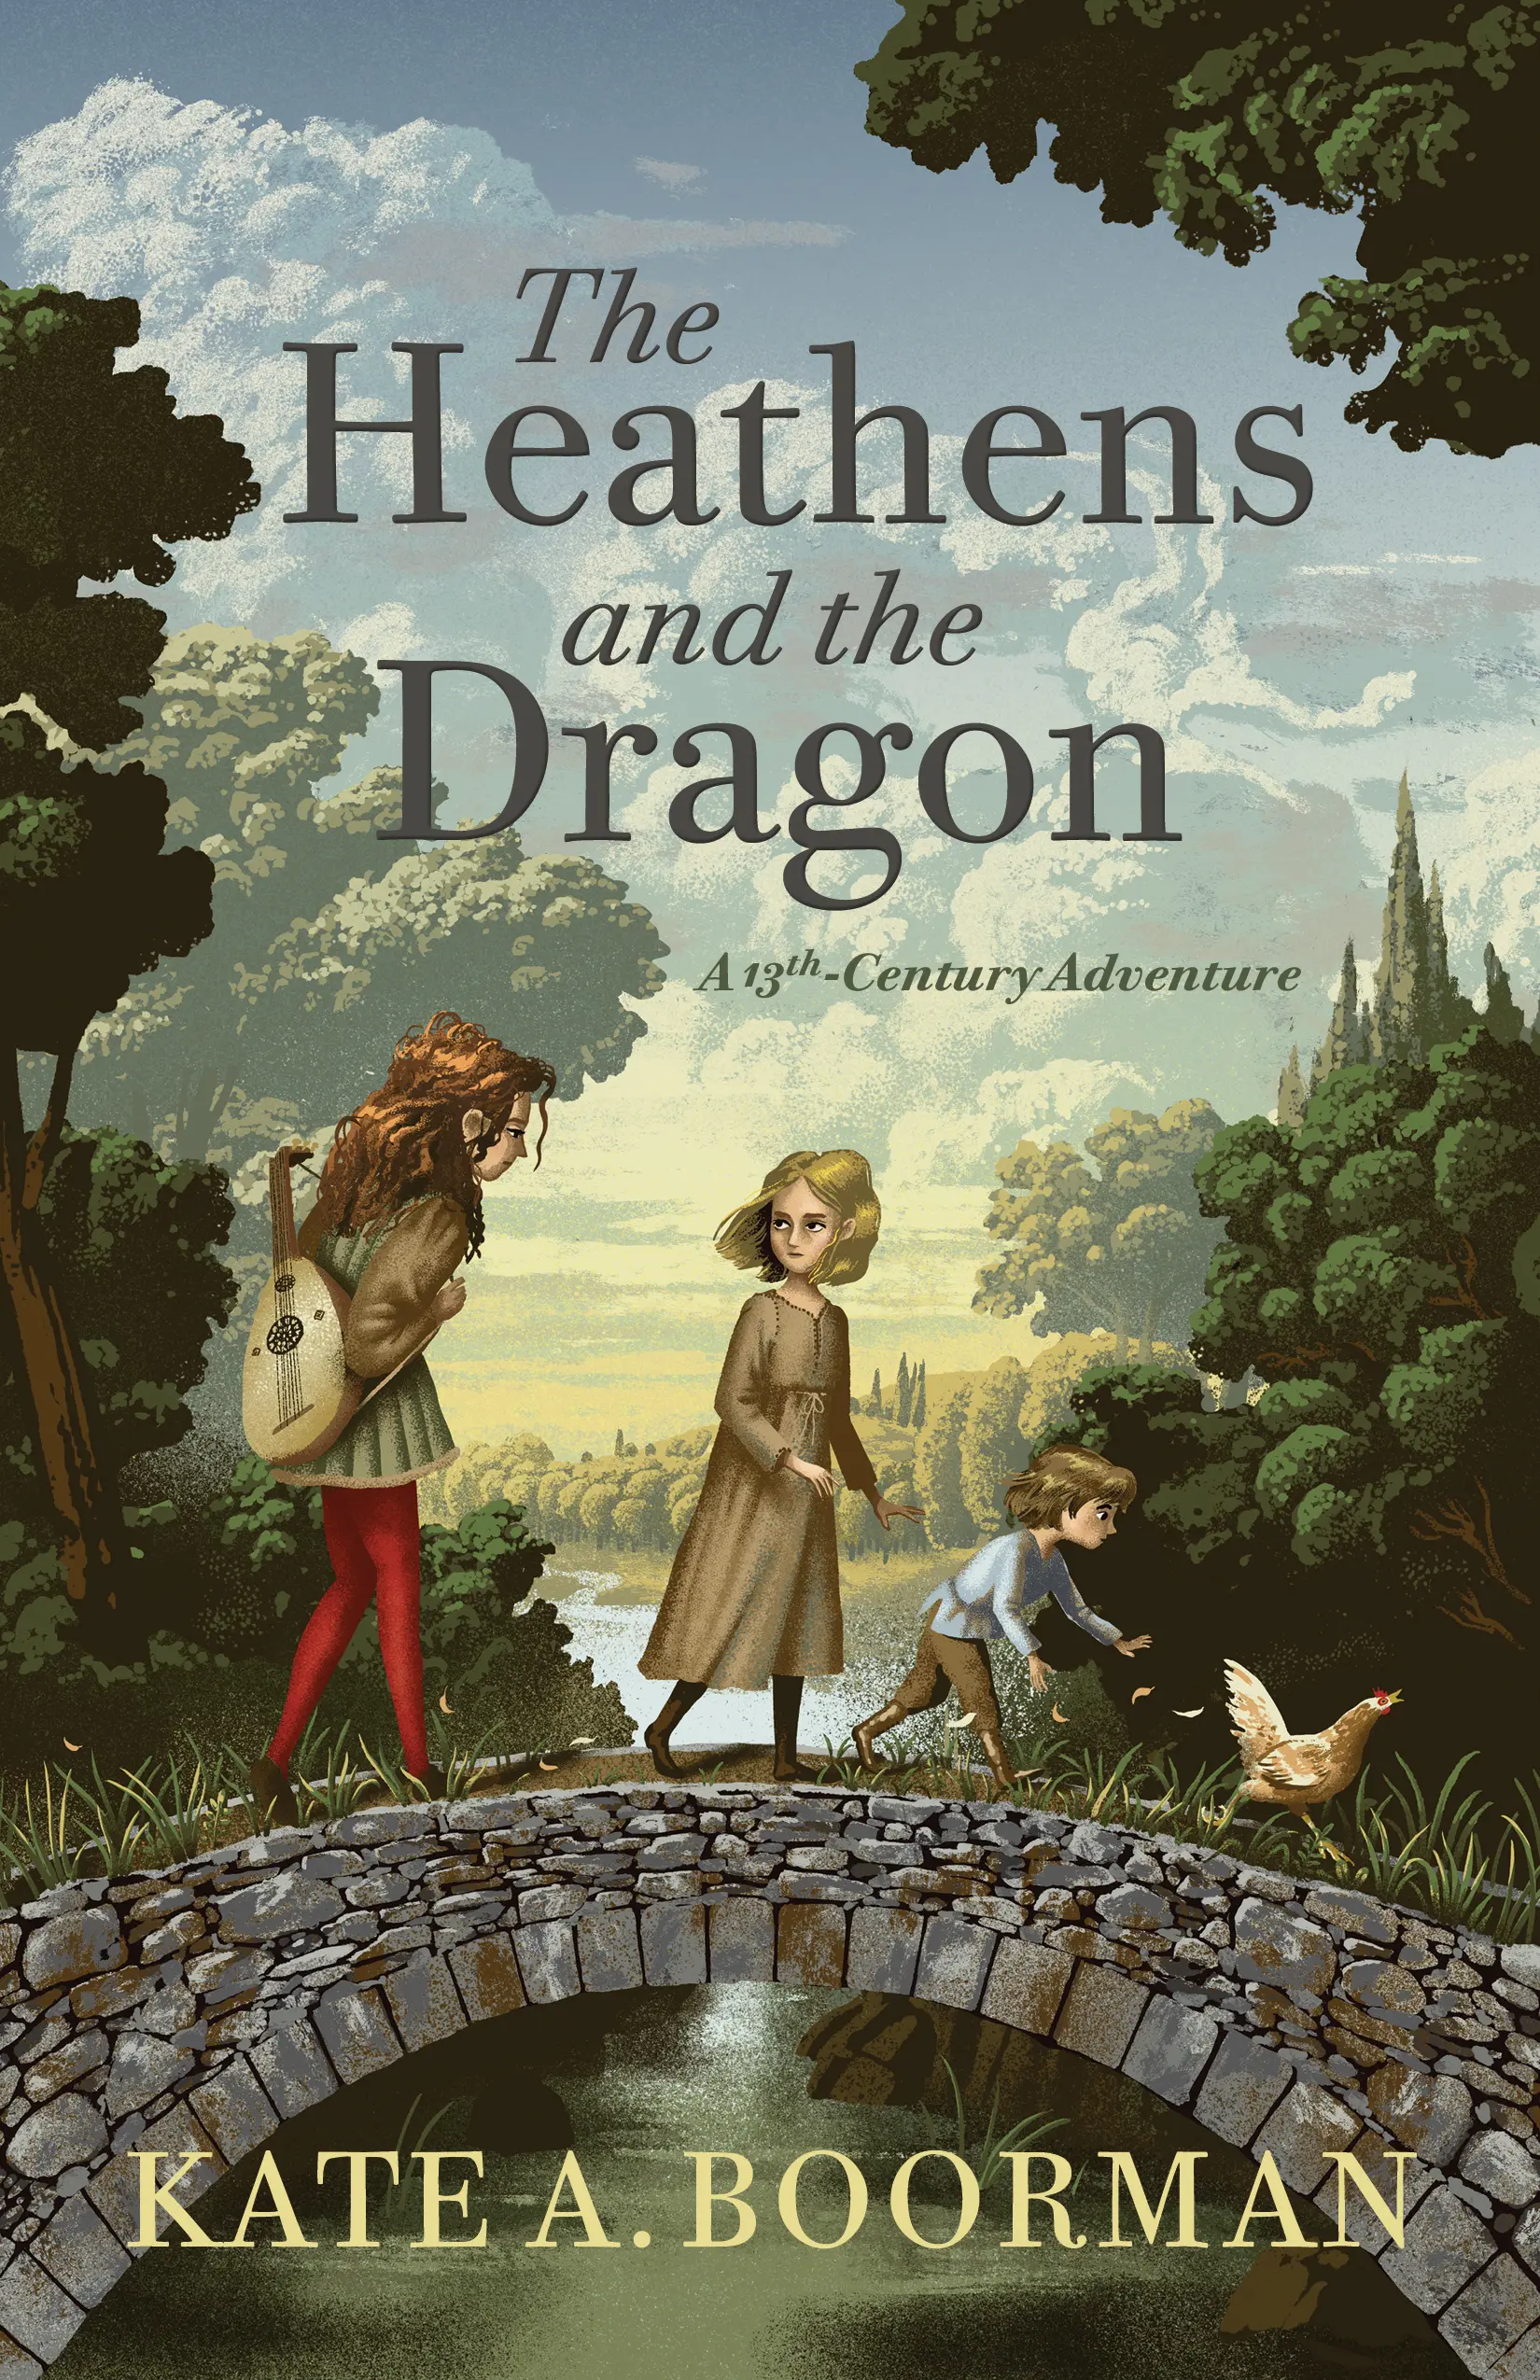 The cover of The Heathens and the Dragon by Kate Boorman. A medieval tapestry-style illustration of three children following a chicken across a bridge, with a castle in the background.